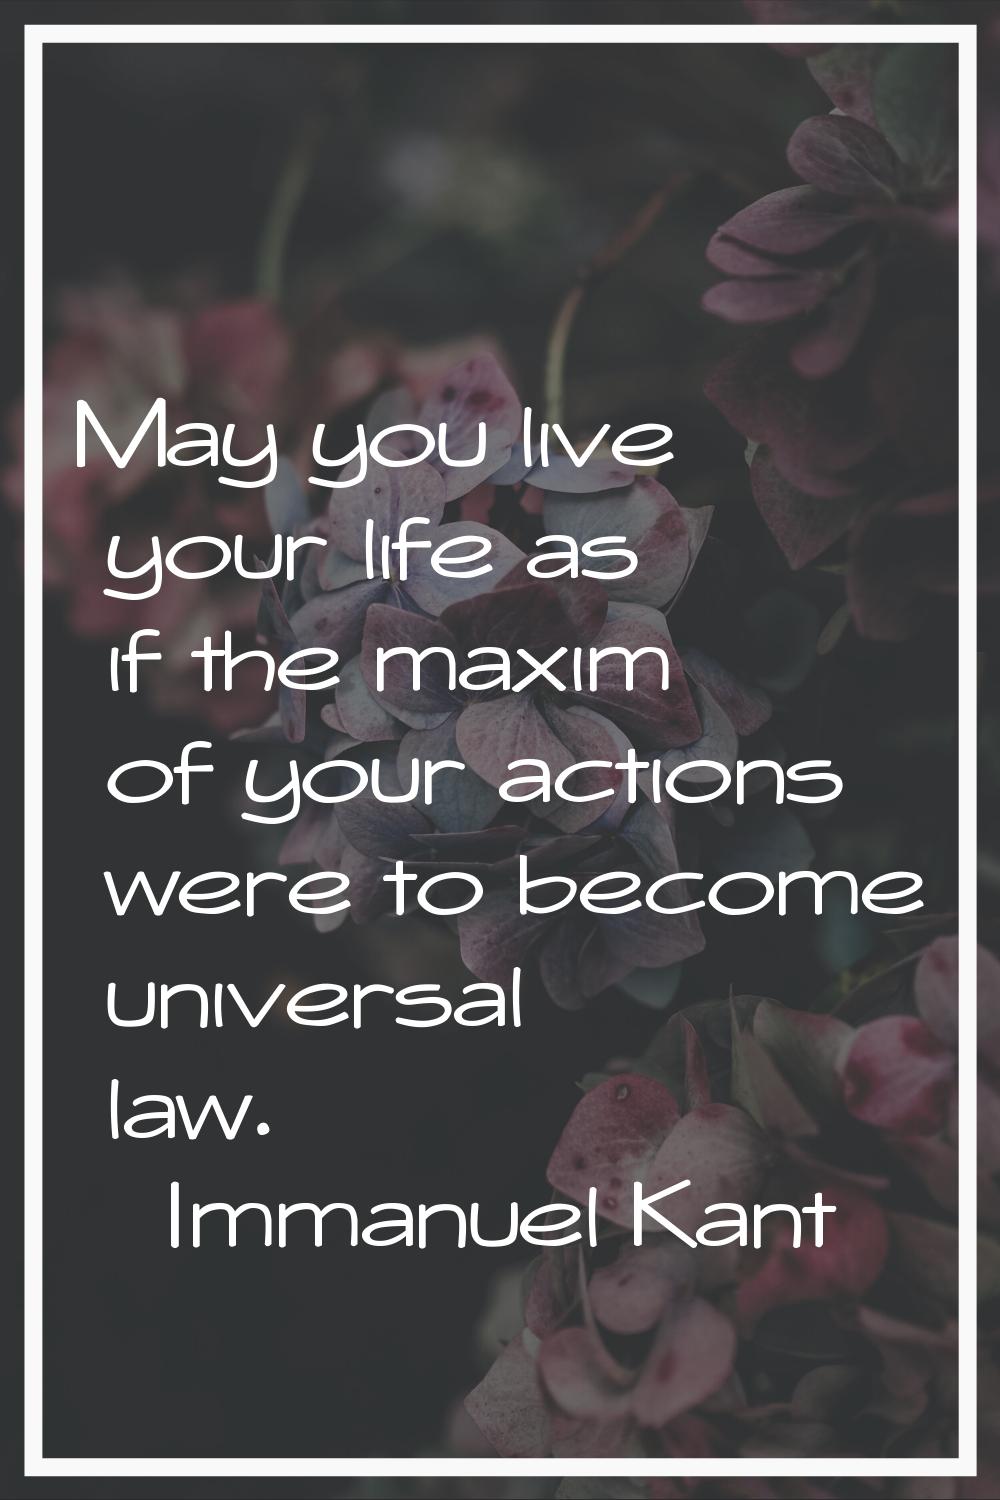 May you live your life as if the maxim of your actions were to become universal law.